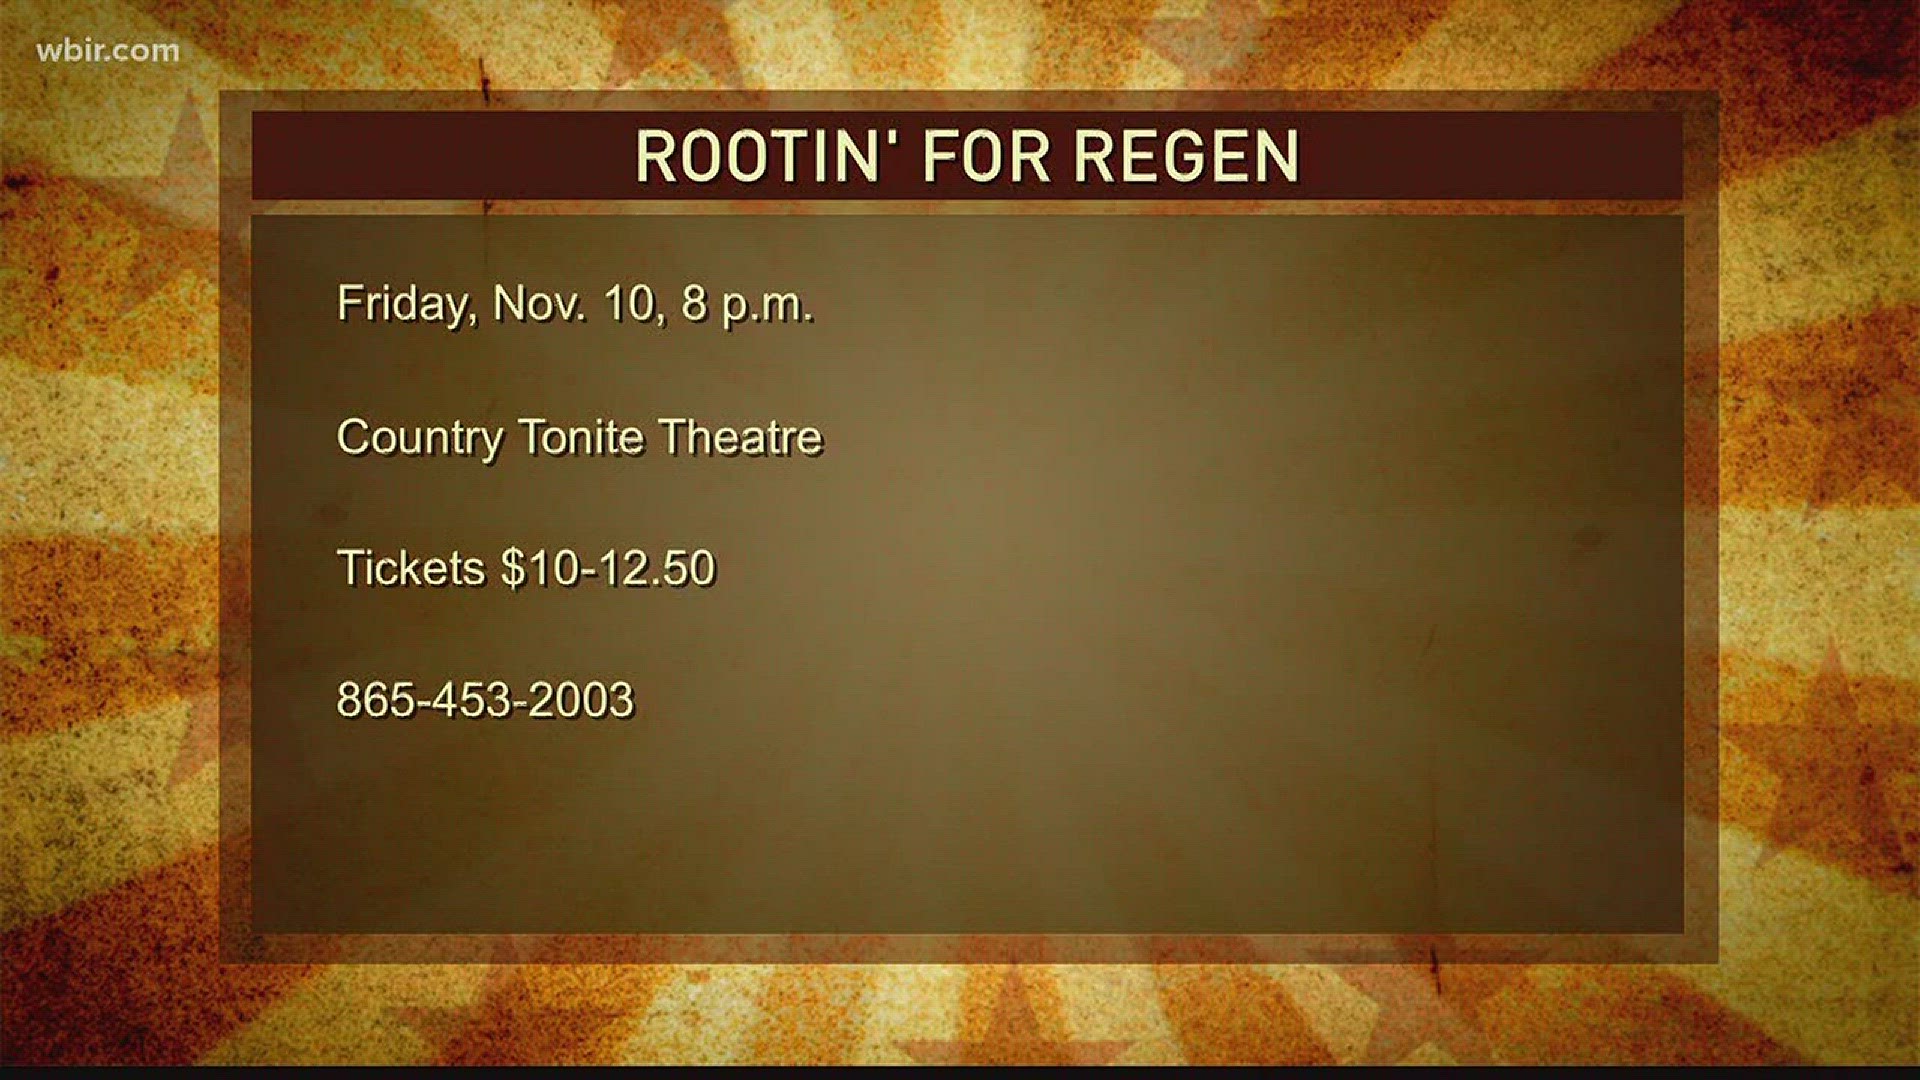 Rootin' for Regen movie premiere
Nov. 10 at 8pm
Country Tonight Theater
November 2, 2017-4pm